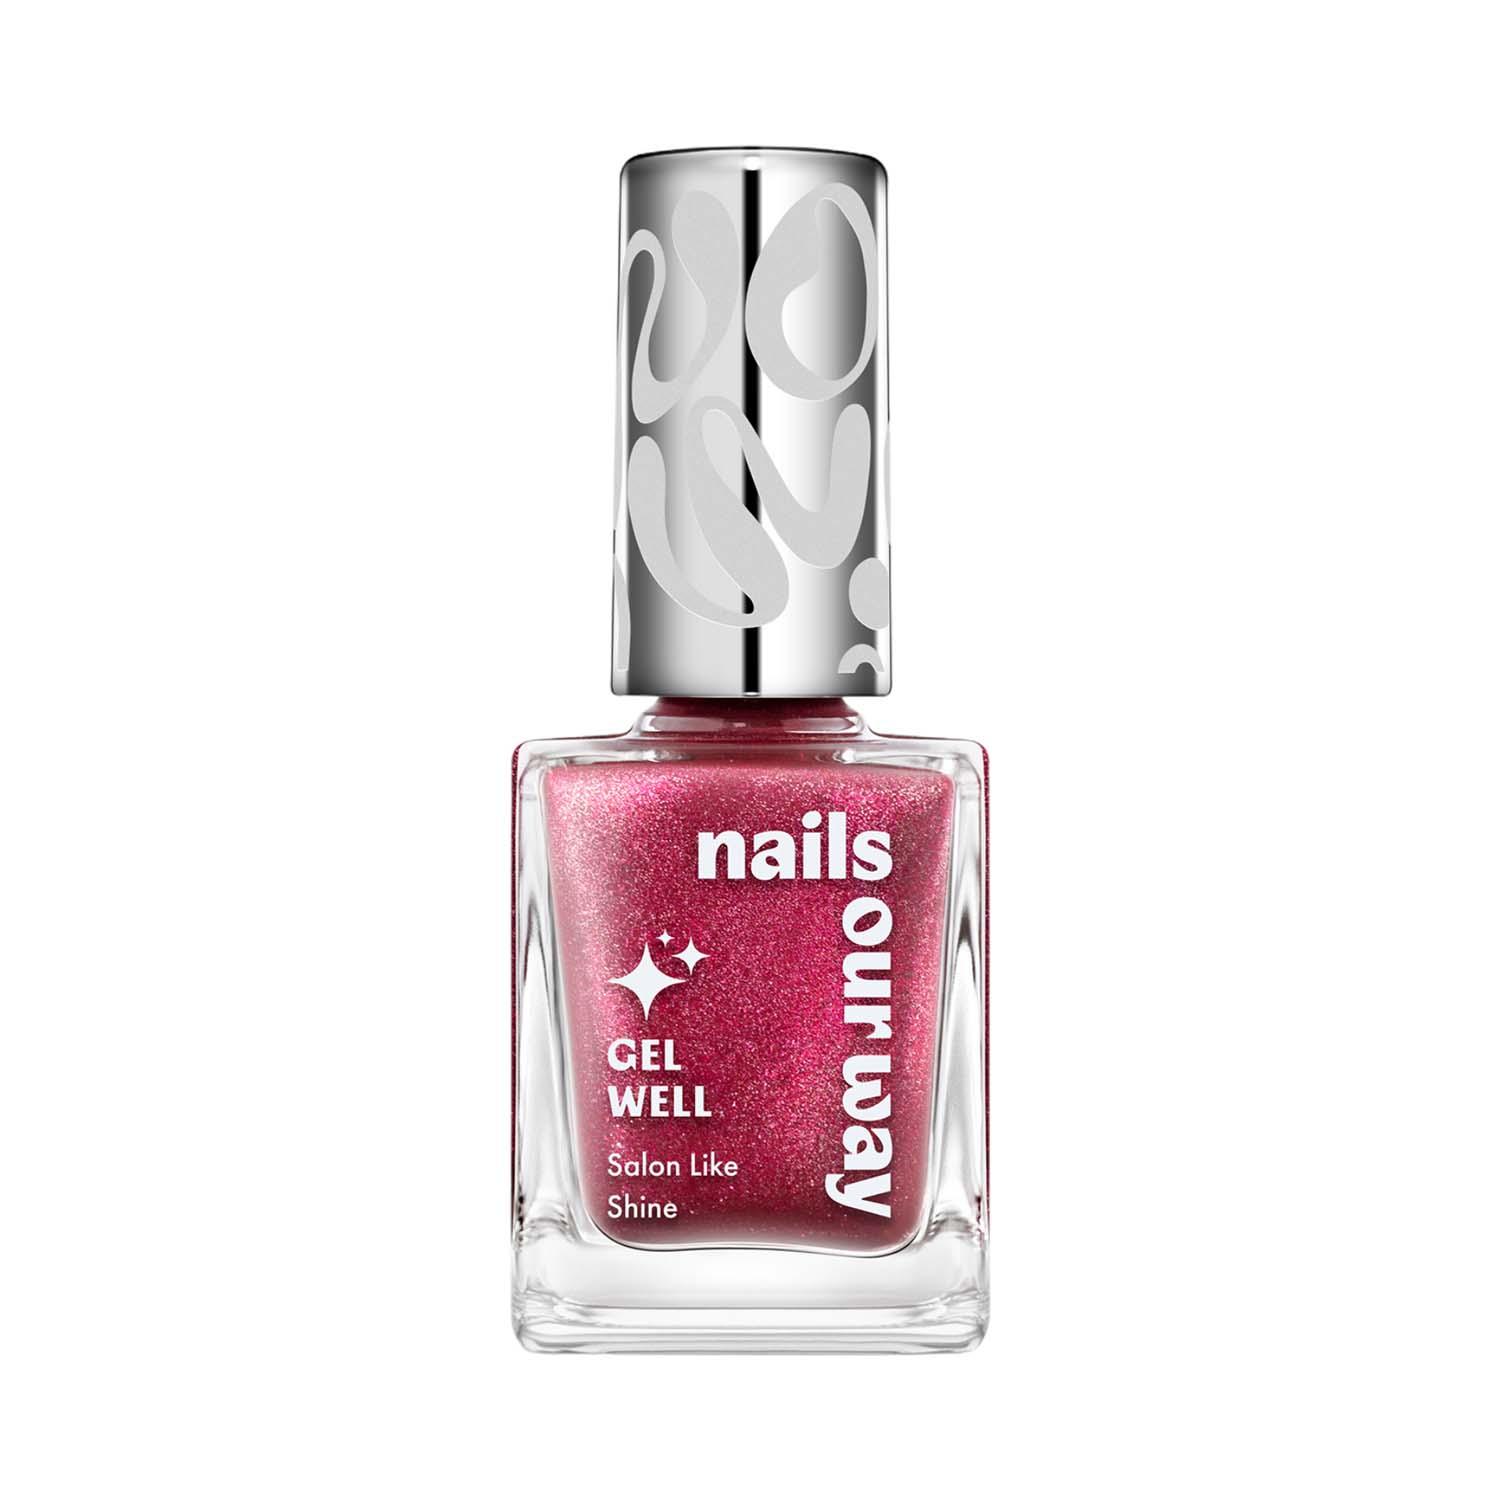 Nails Our Way | Nails Our Way Gel Well Nail Enamel - 218 Upbeat (10 ml)